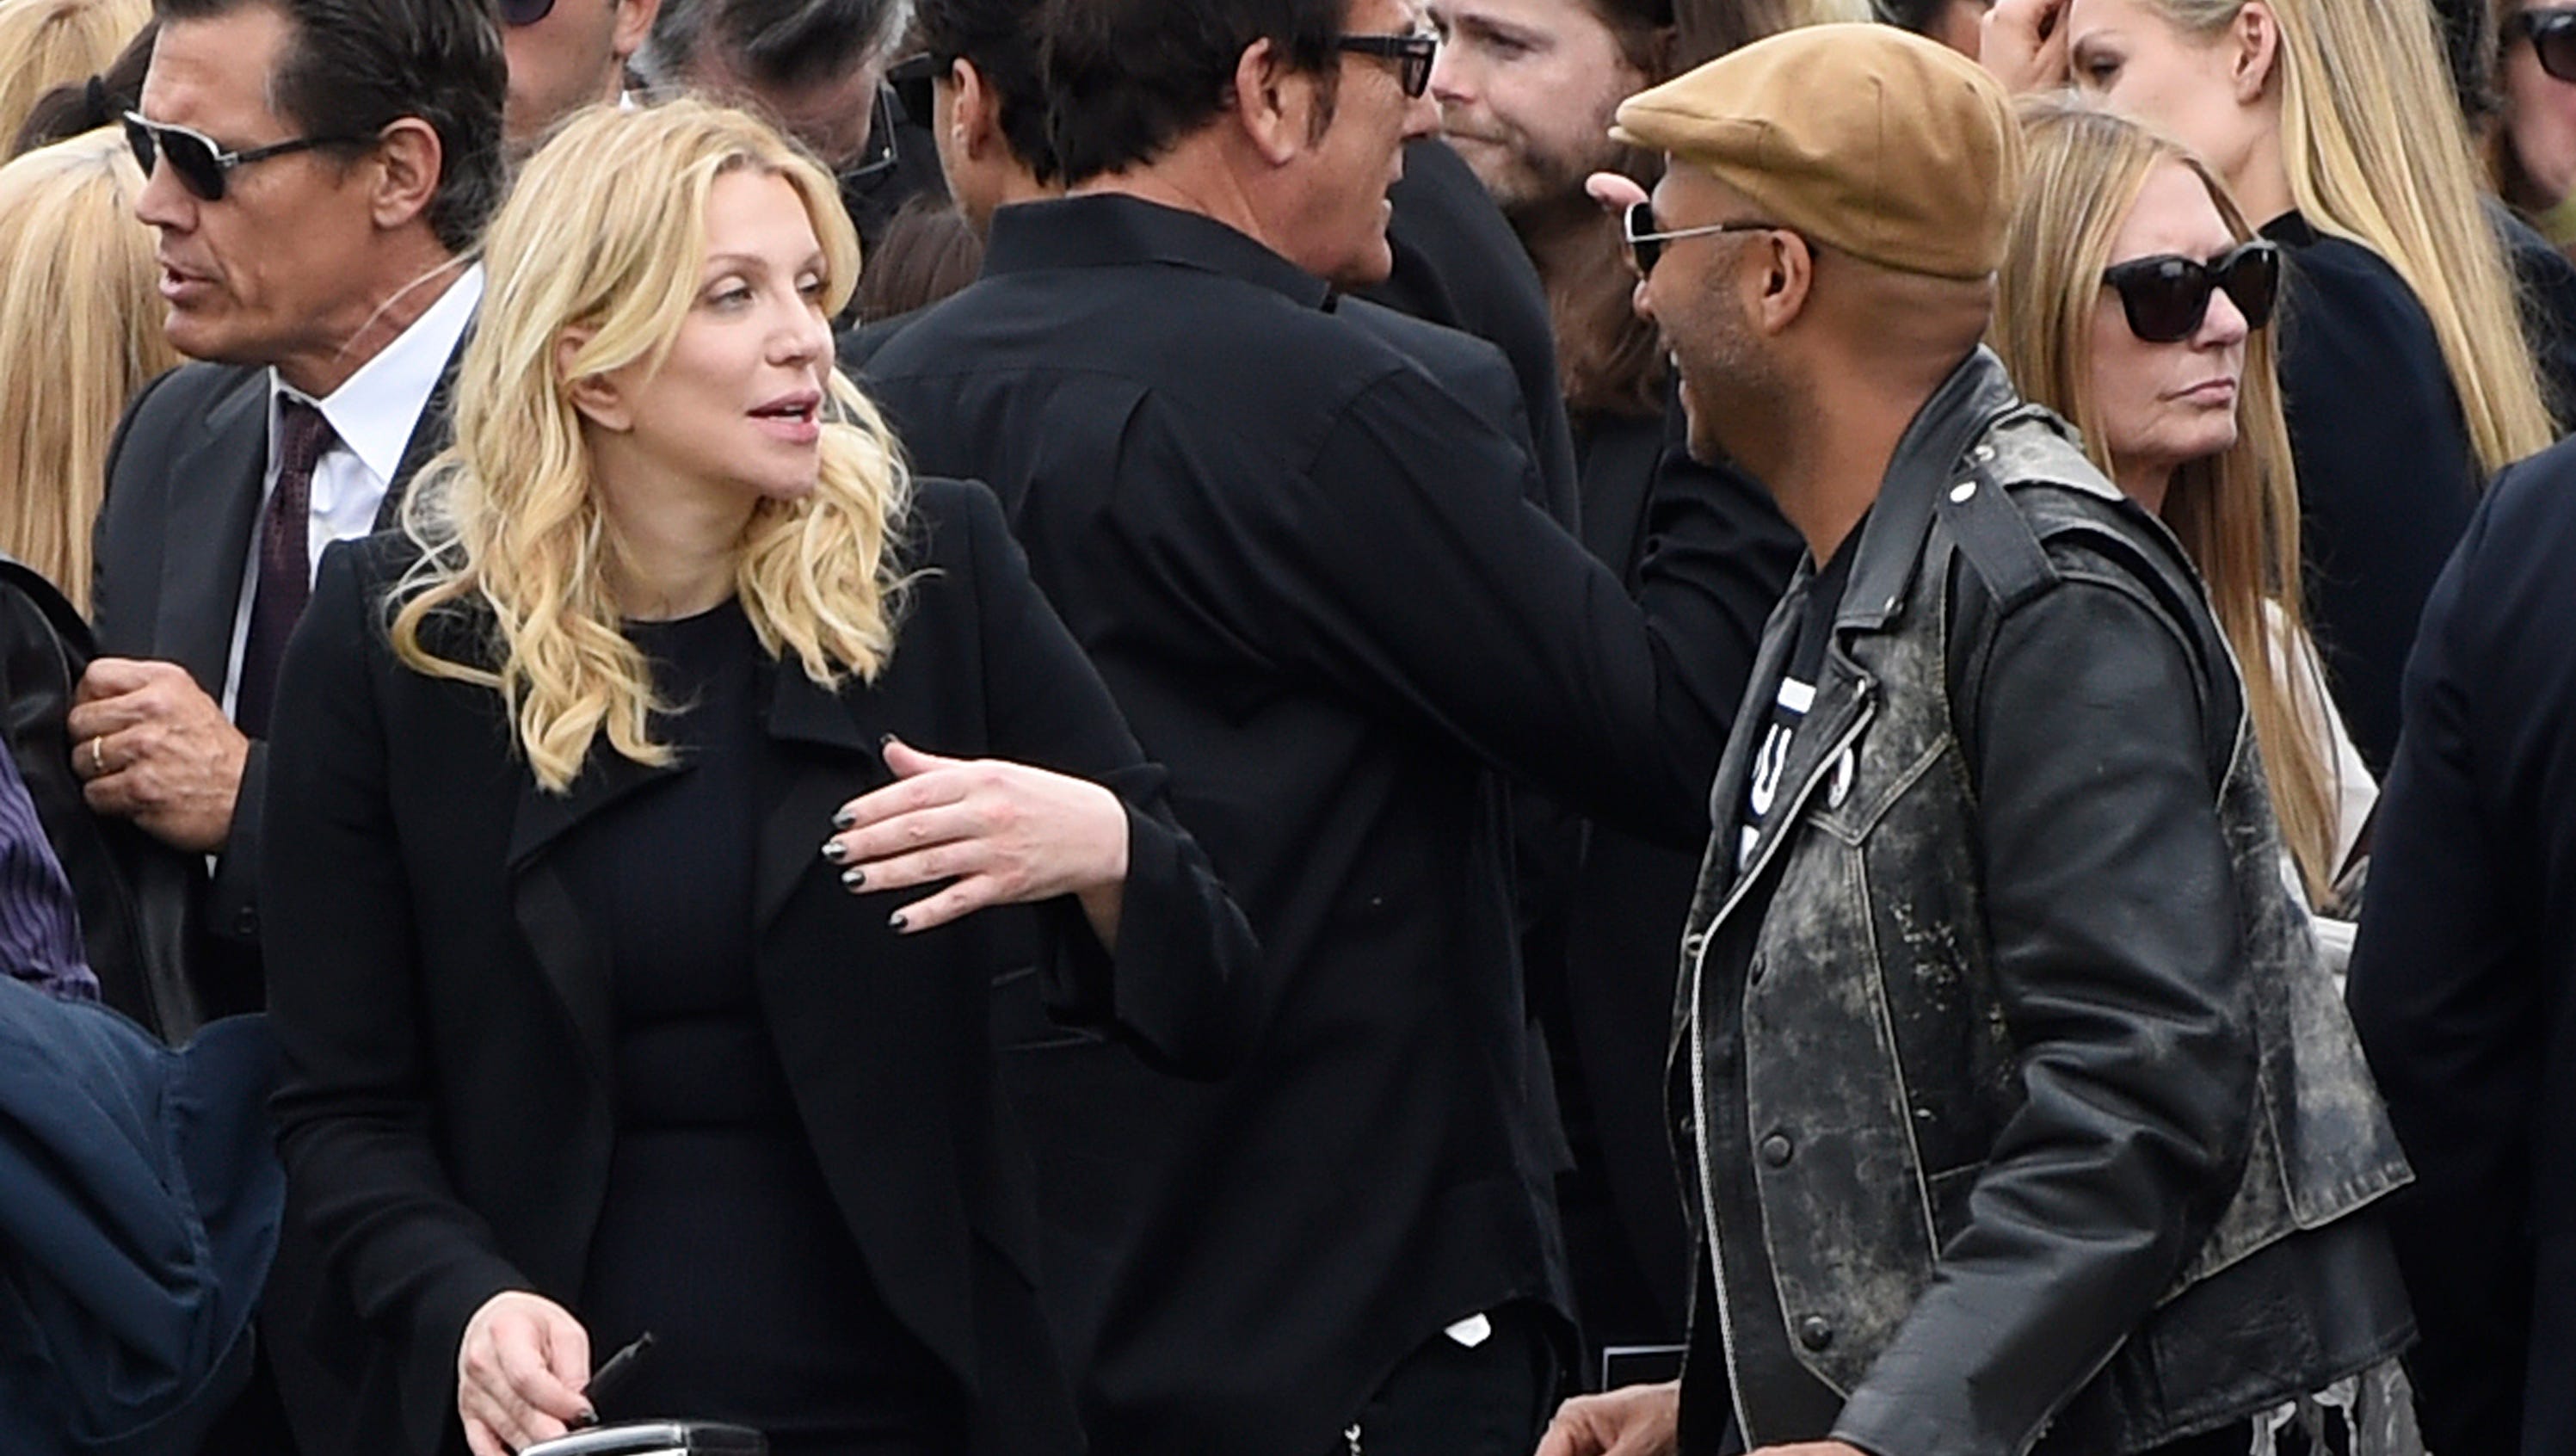 Courtney Love, left, and Tom Morello attend a funeral for Chris Cornell at the Hollywood Forever Cemetery on Friday, May 26, 2017, in Los Angeles.